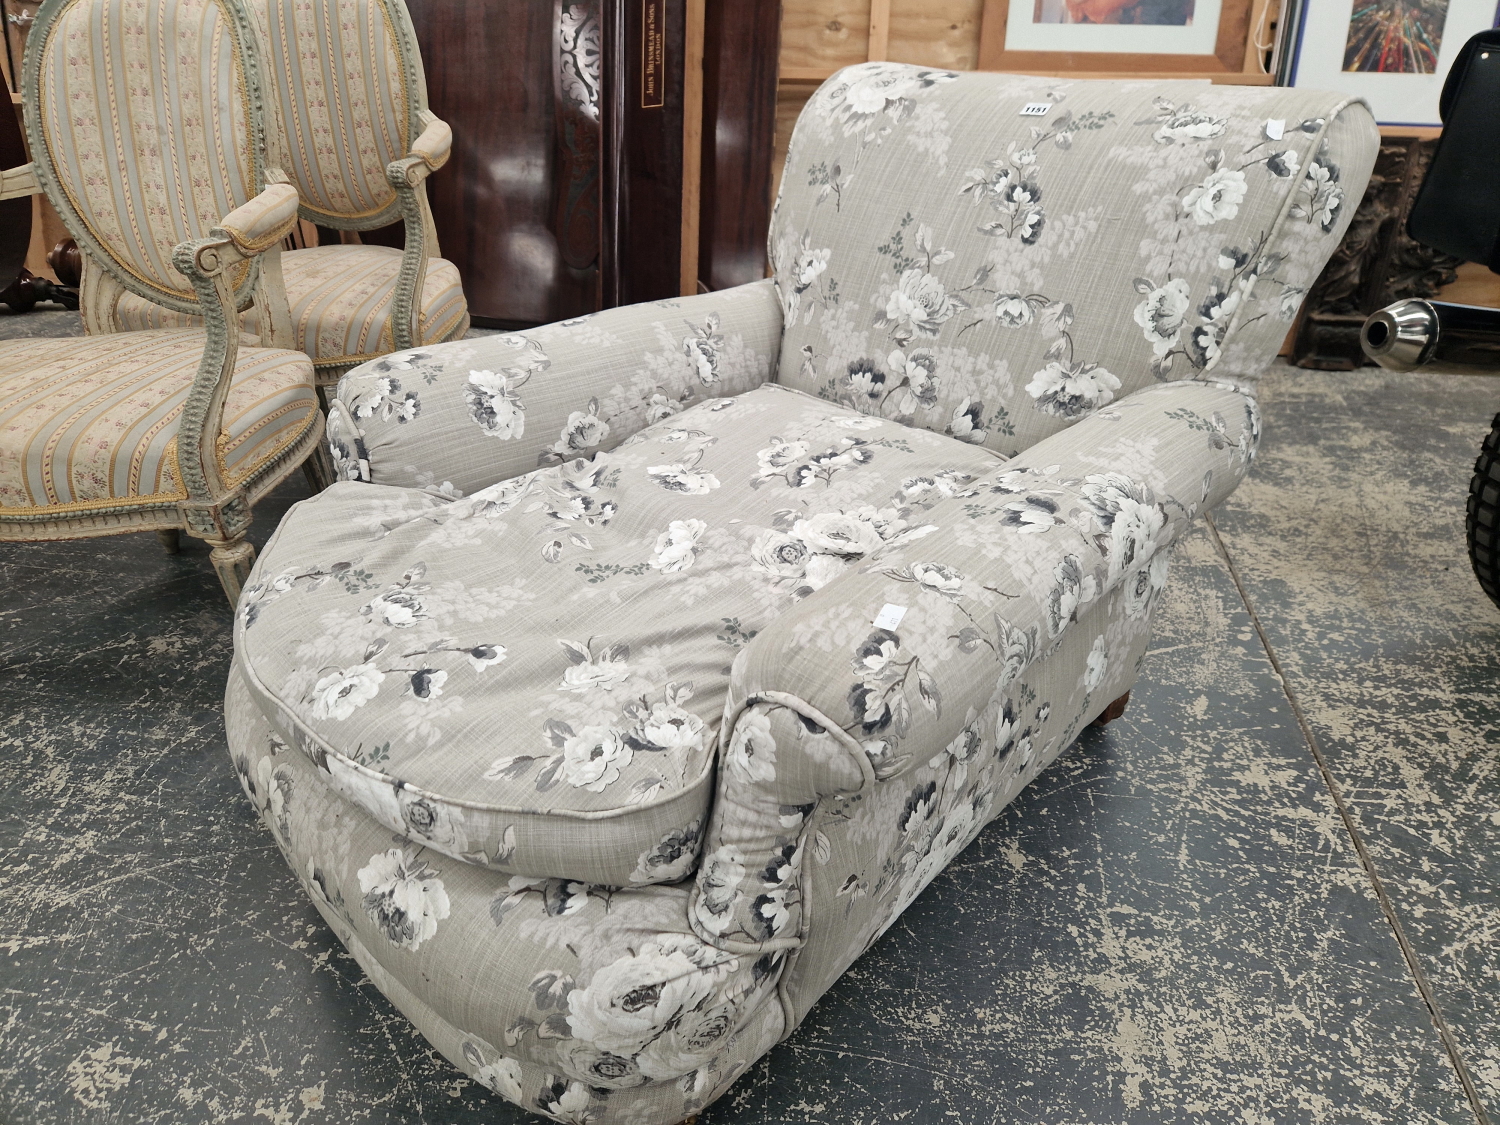 A HOWARD TYPE ARMCHAIR BY WILLIAM BIRCH UPHOLSTERED IN GREY FLORAL MATERIAL, ONE MAHOGANY BACK LEG - Image 4 of 6